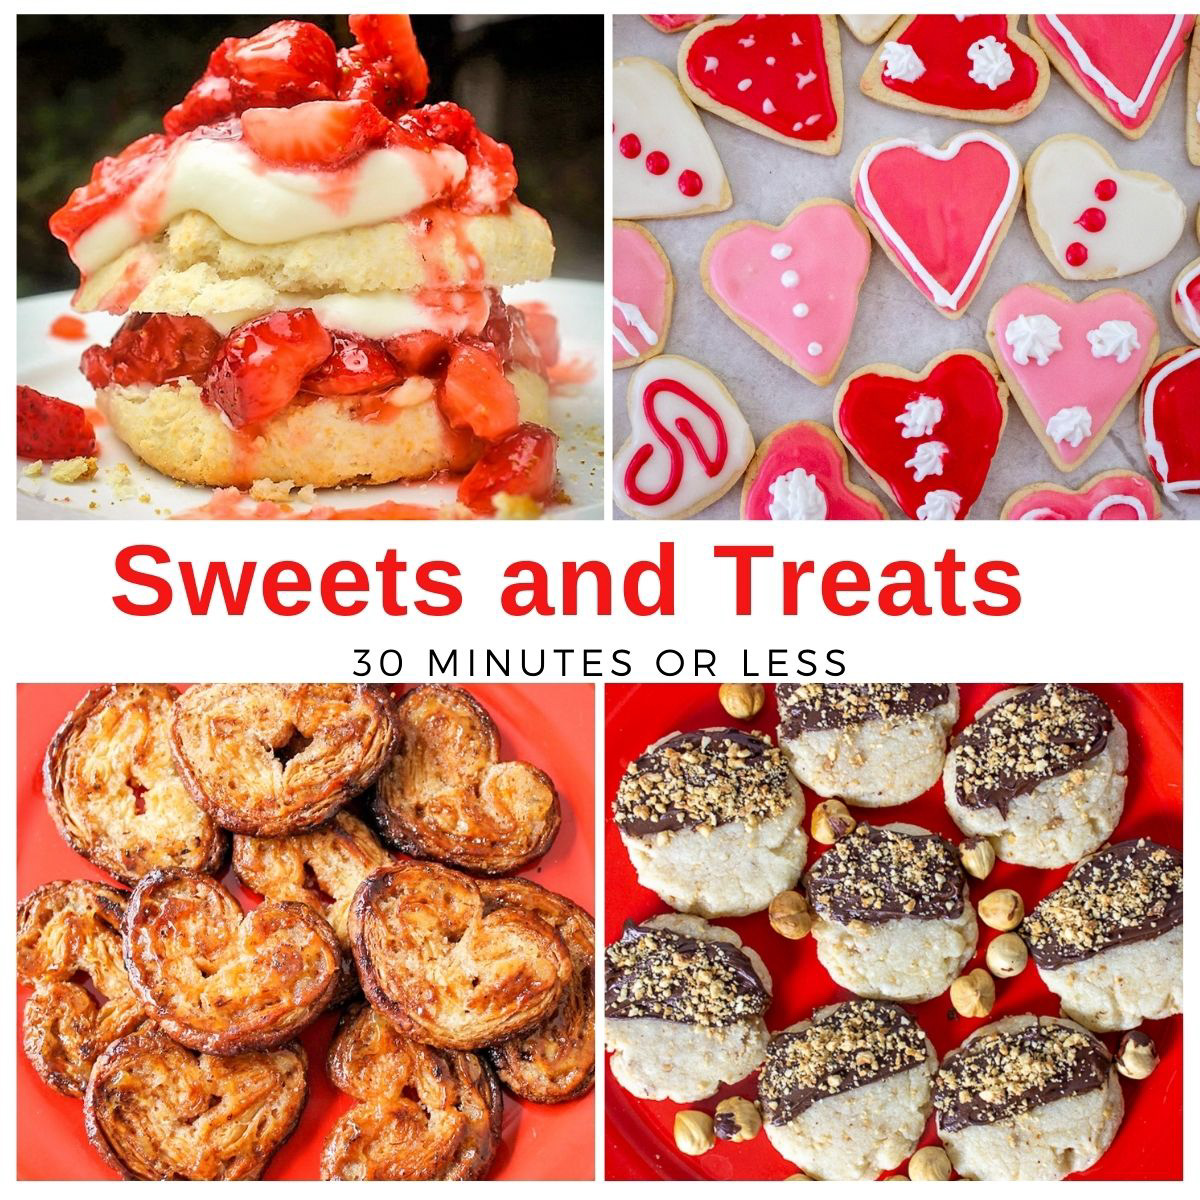 15 Sweets and Treats (30 minutes or less)